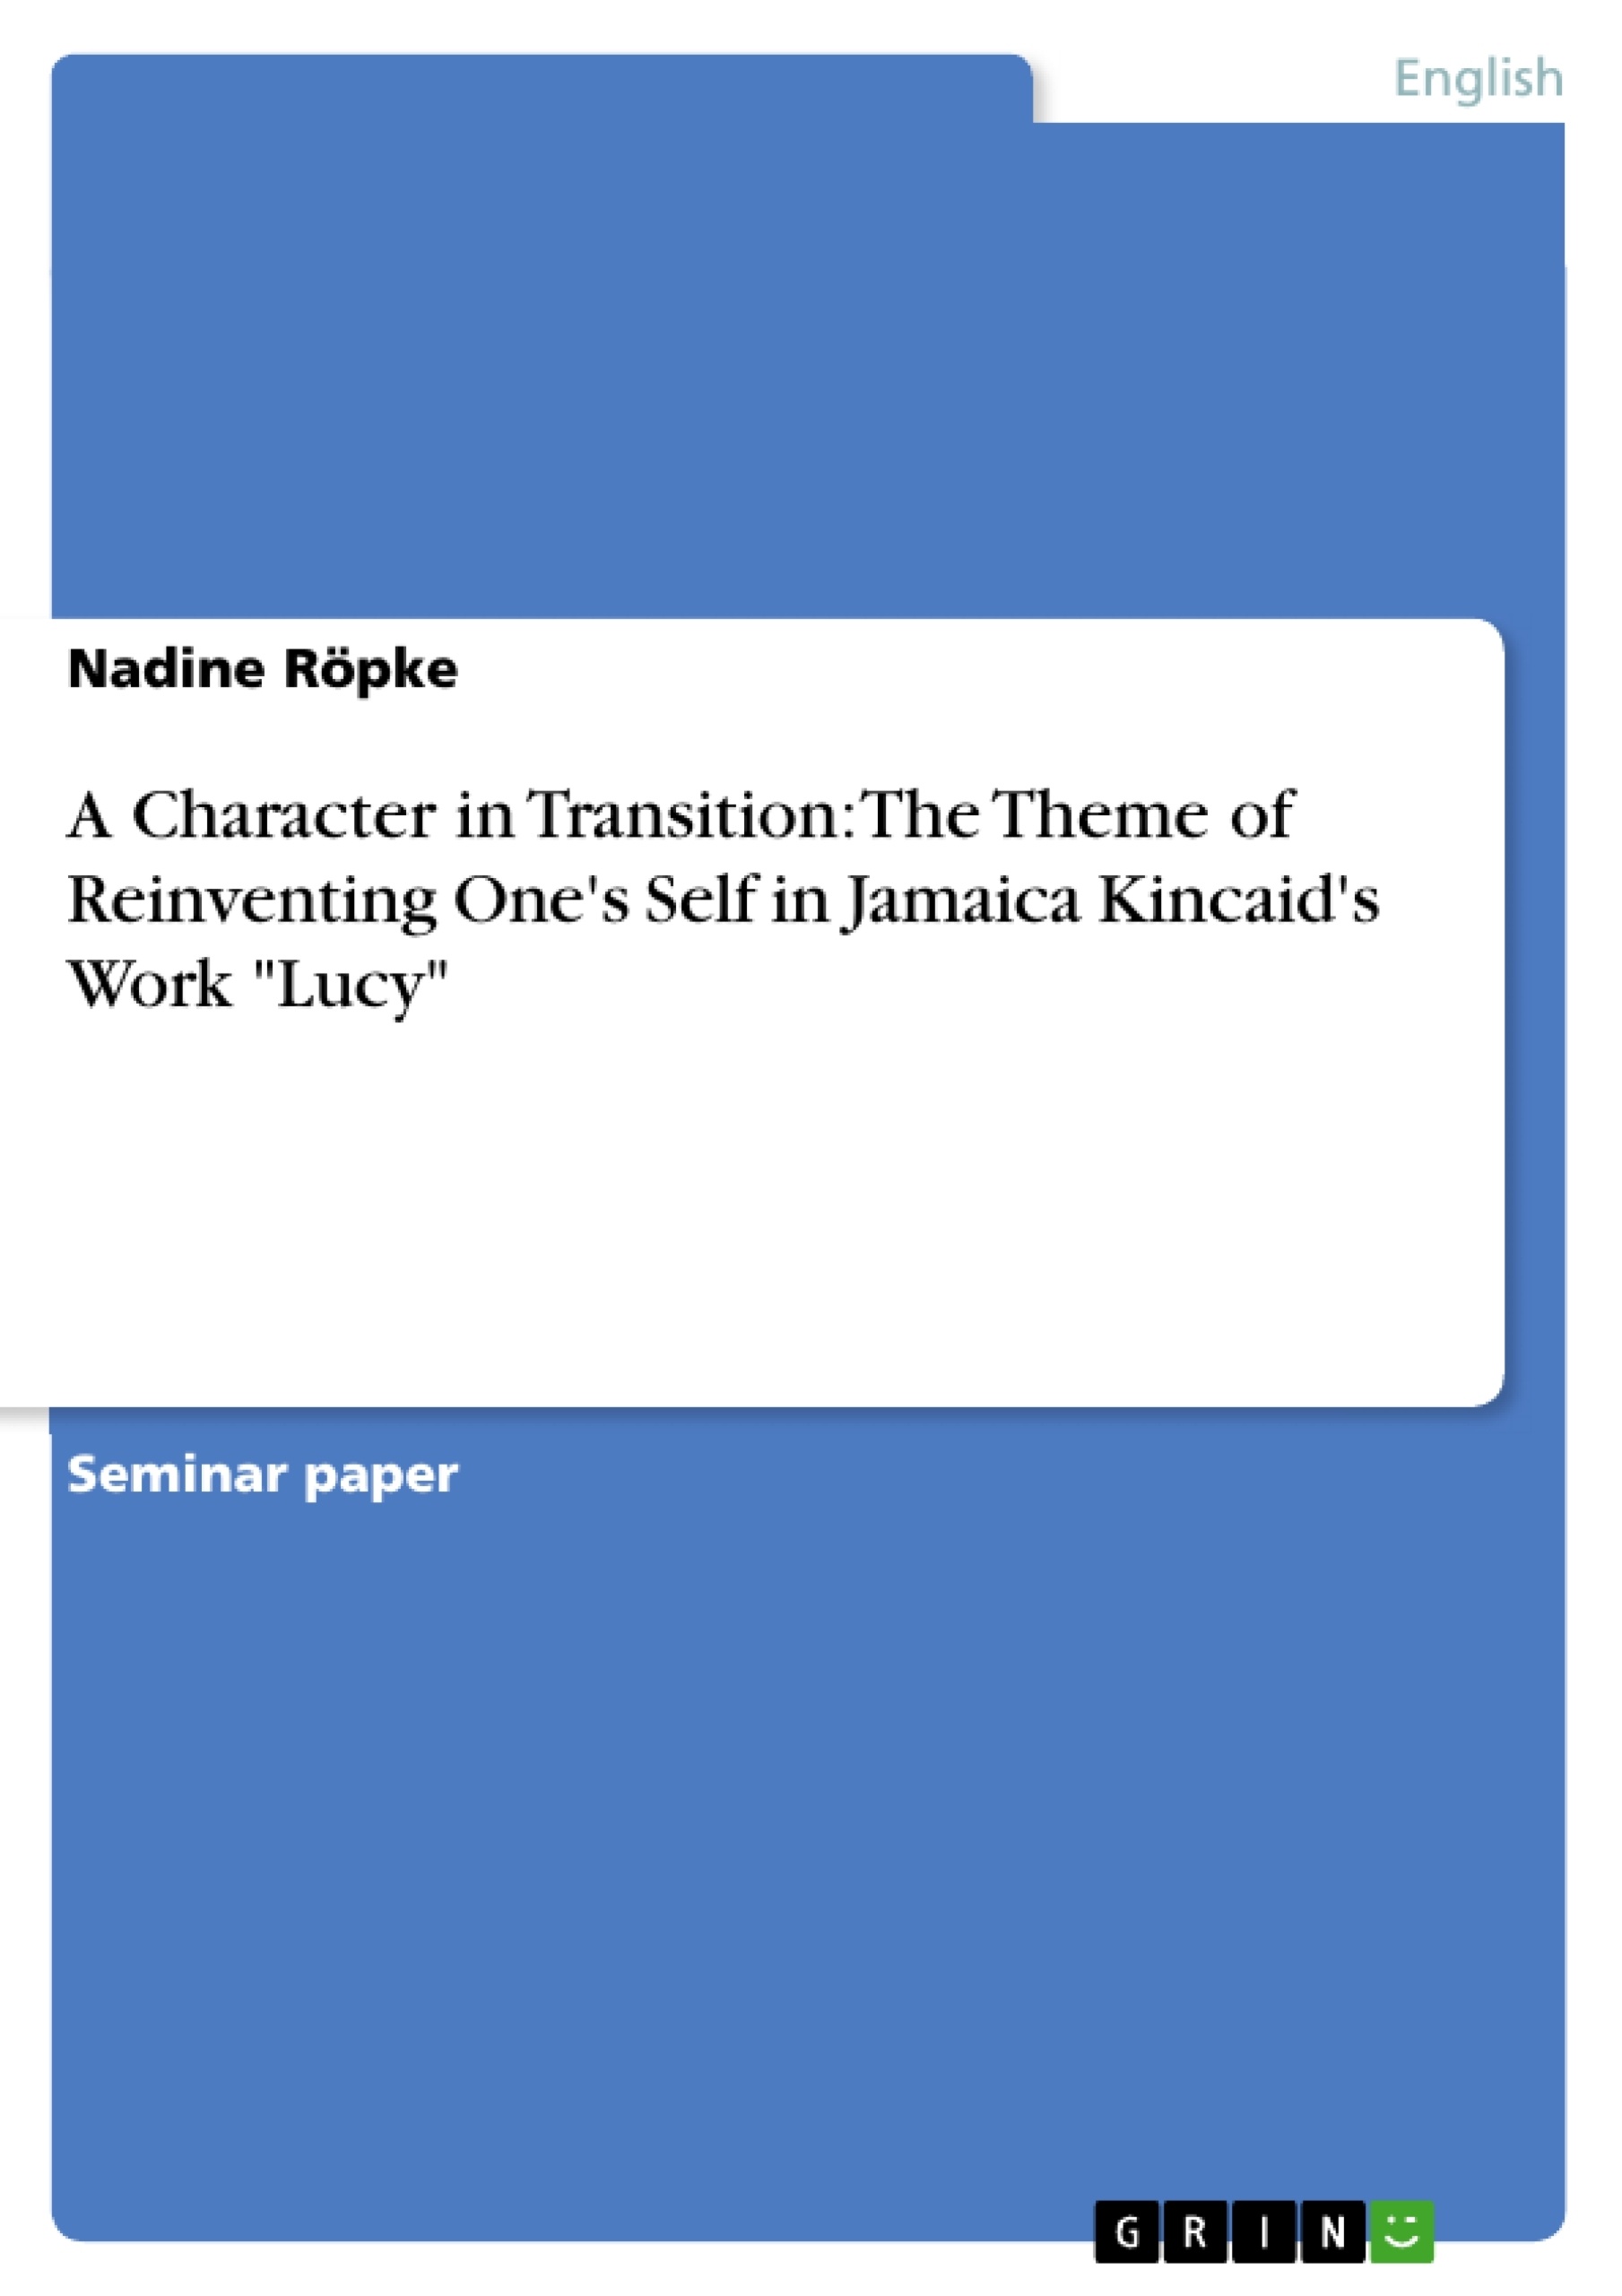 Titre: A Character in Transition: The Theme of Reinventing One's Self in Jamaica Kincaid's Work "Lucy"